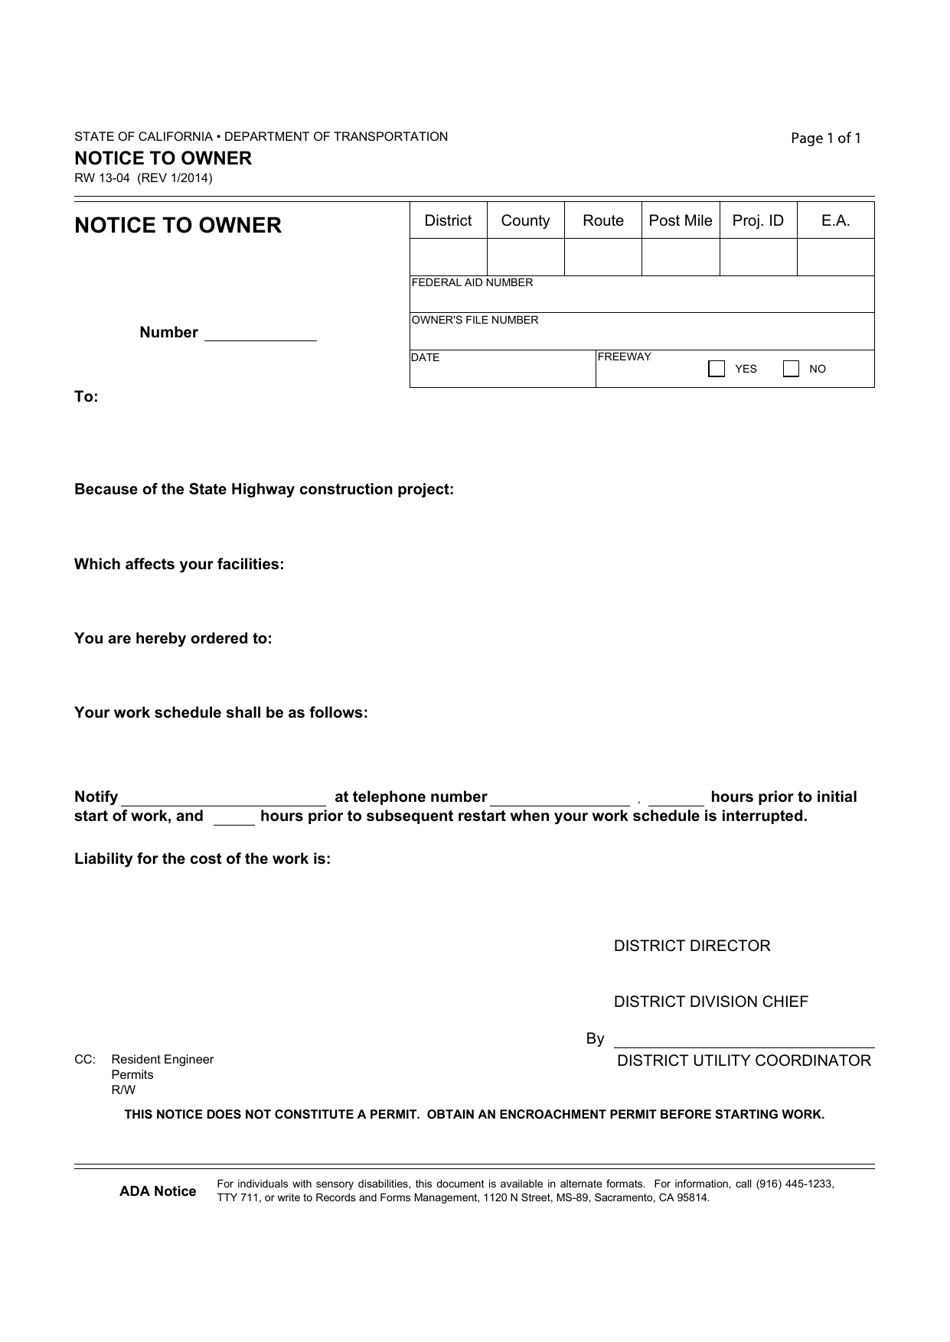 Form RW13-04 Notice to Owner - California, Page 1